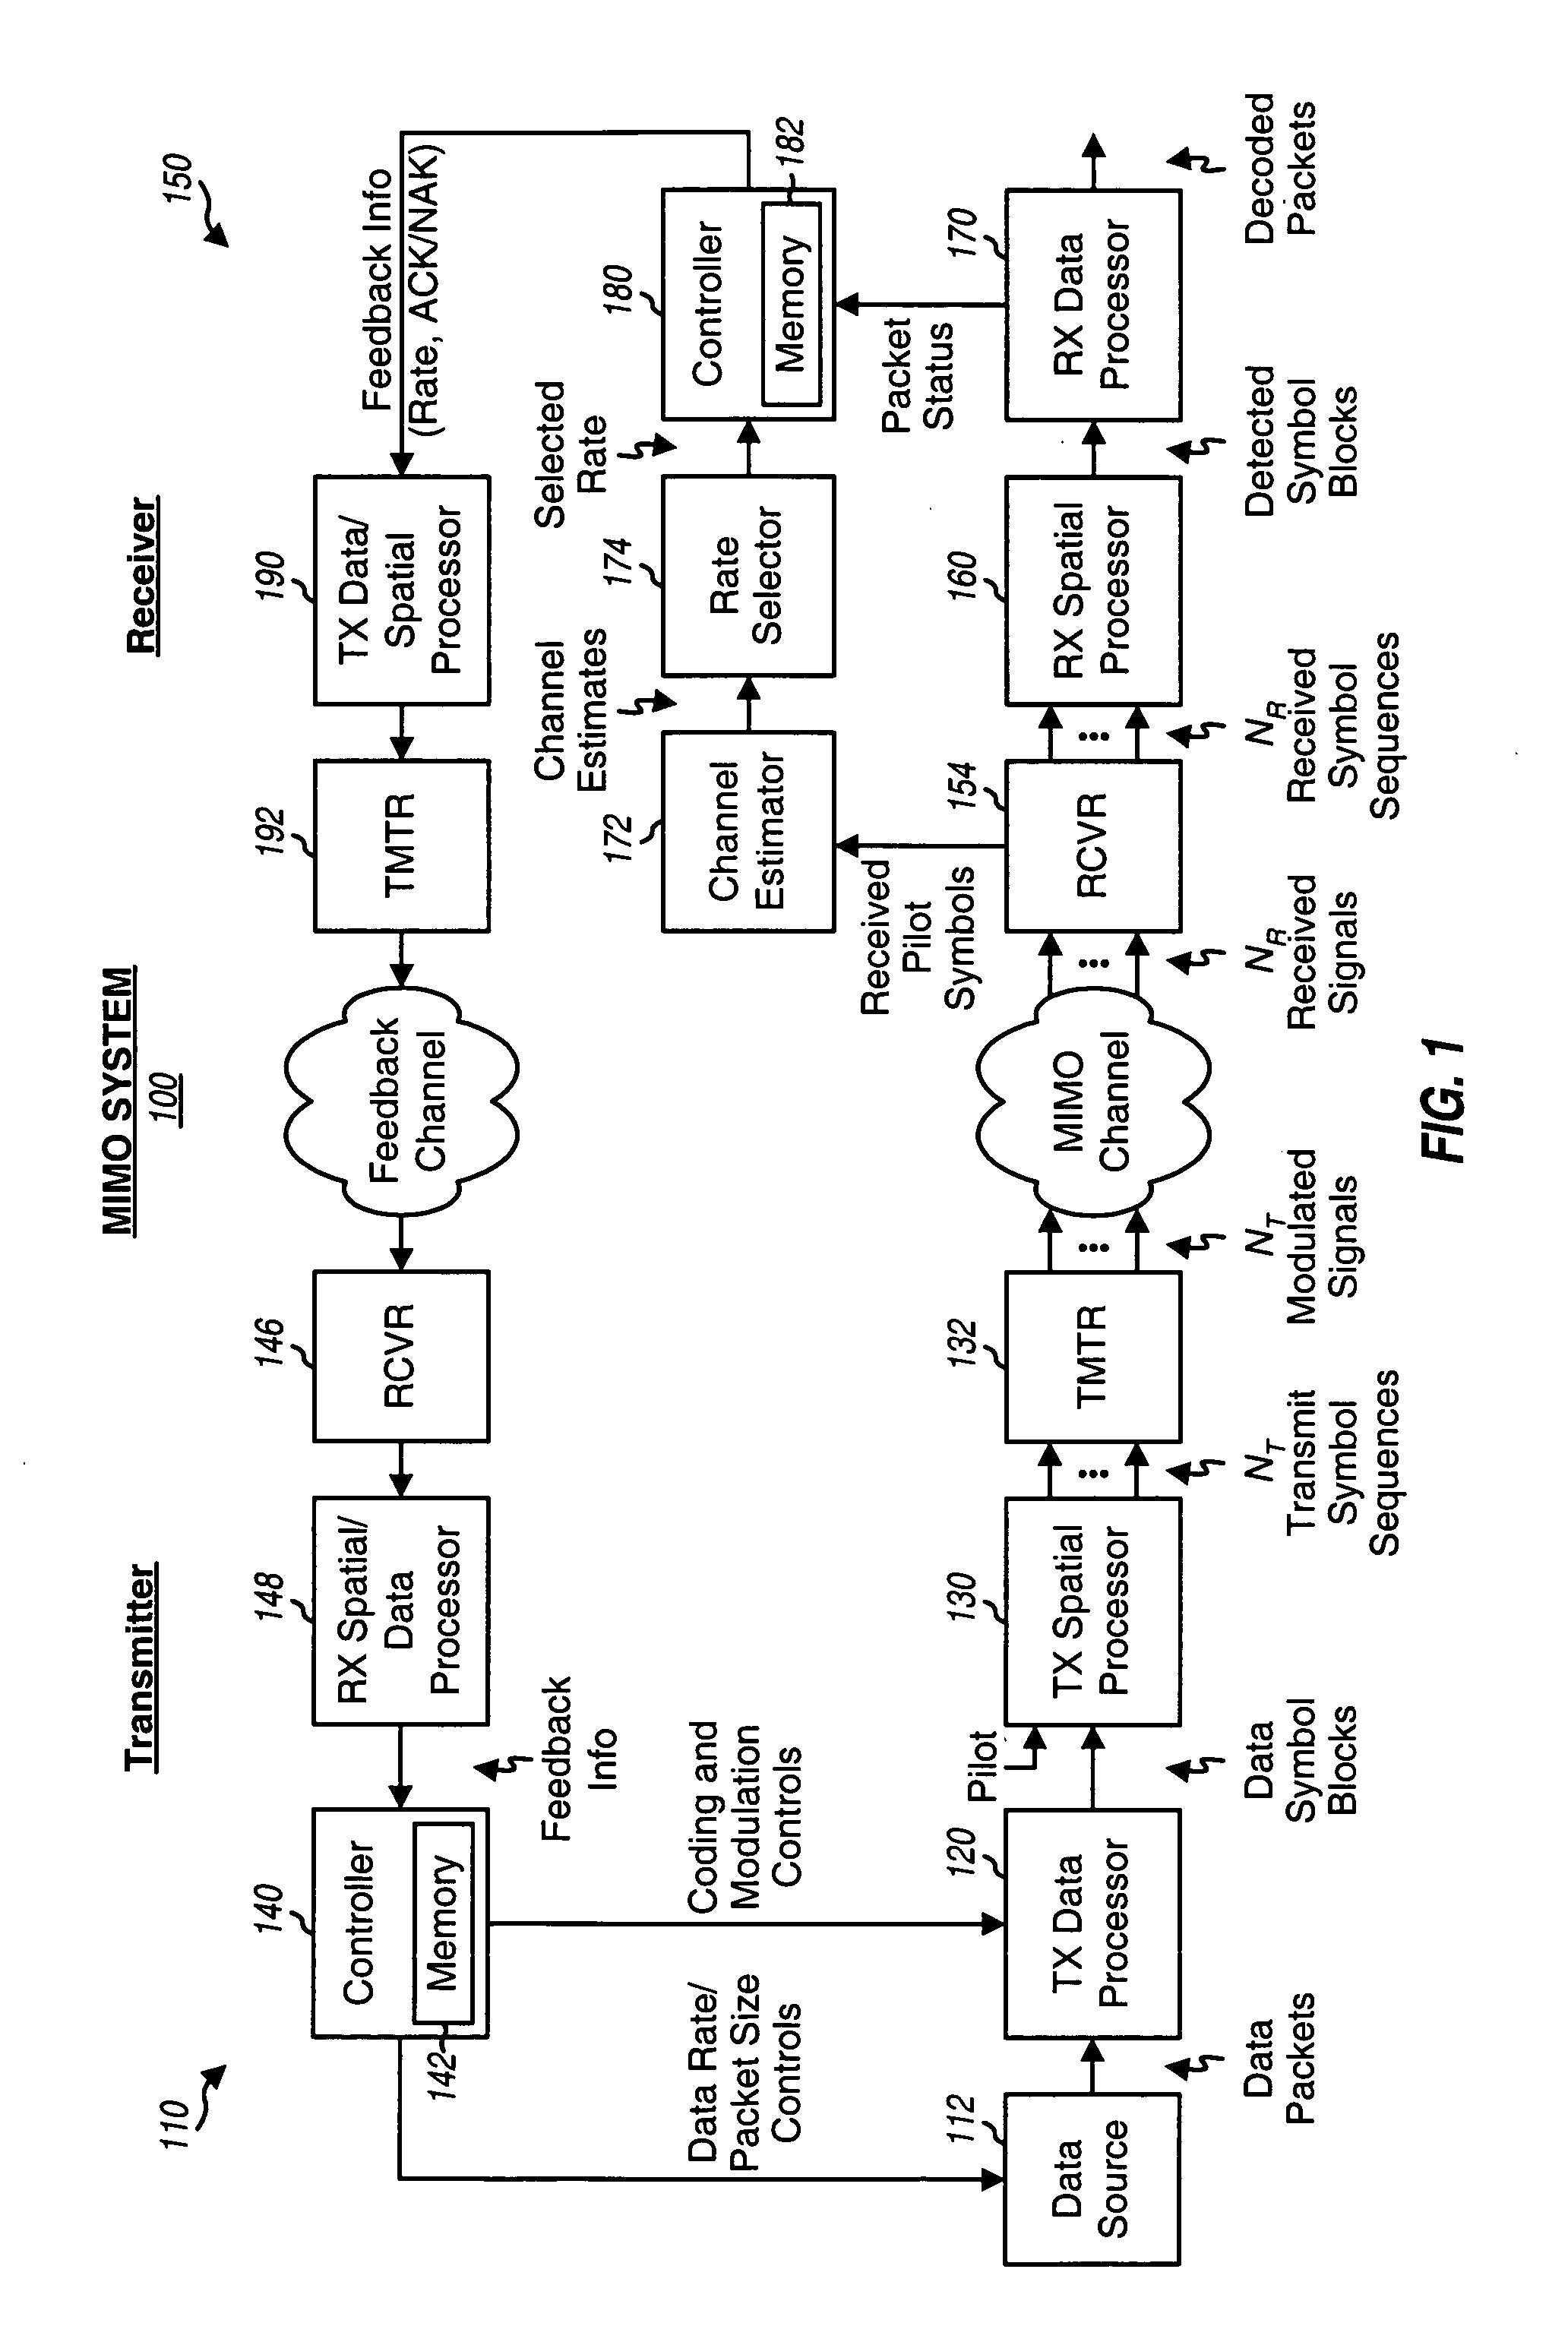 Incremental redundancy transmission in a MIMO communication system